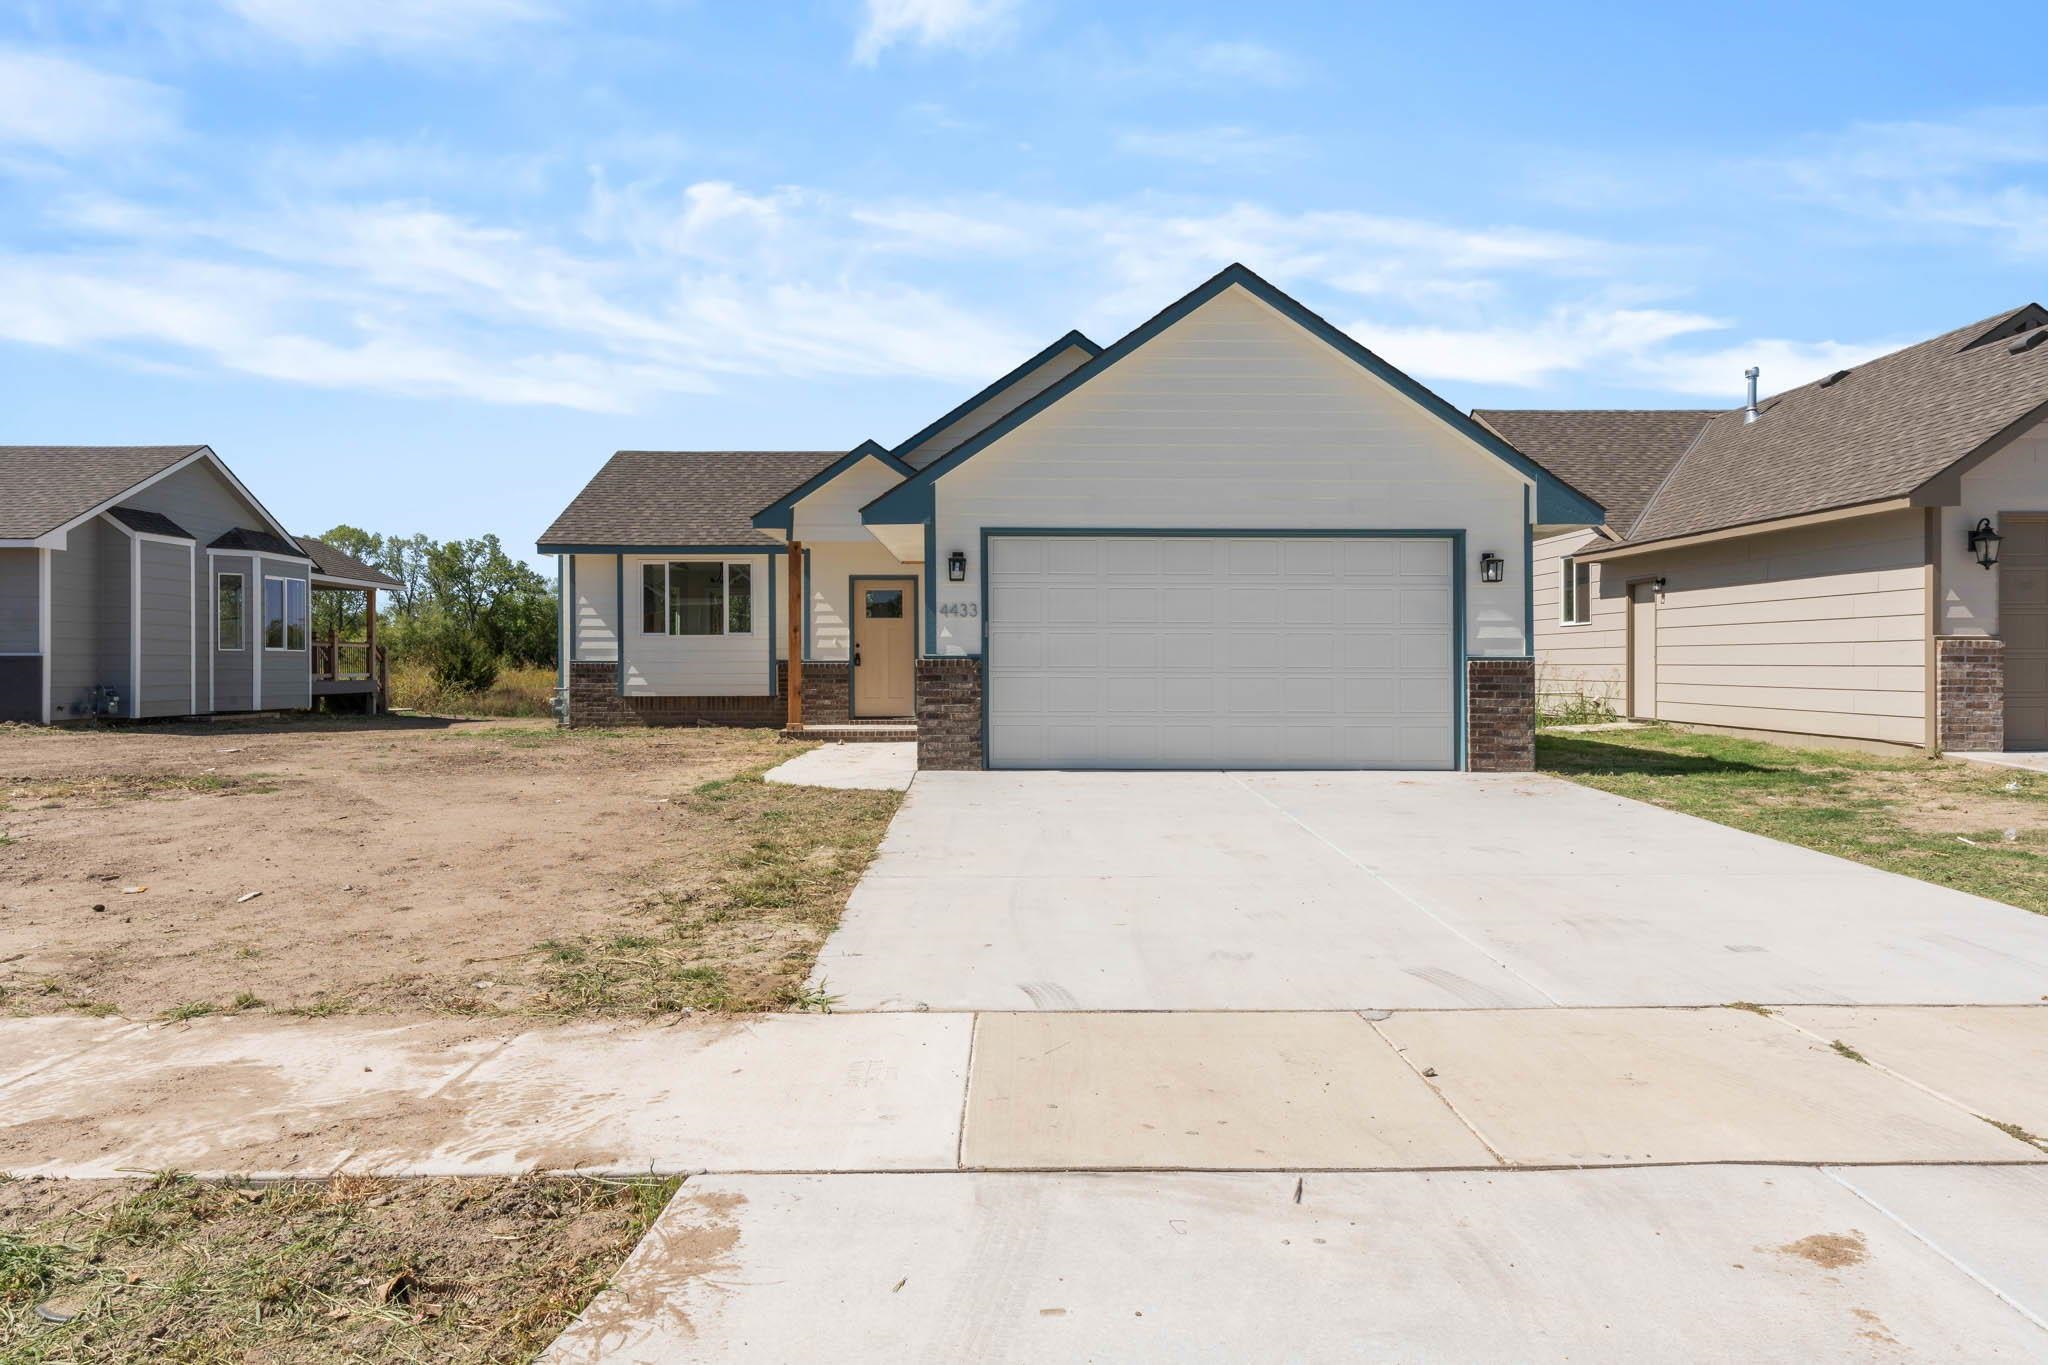 Welcome home! This 2 bedroom, 2 bathroom home, with kitchen island, 2 car garage, and covered deck, 